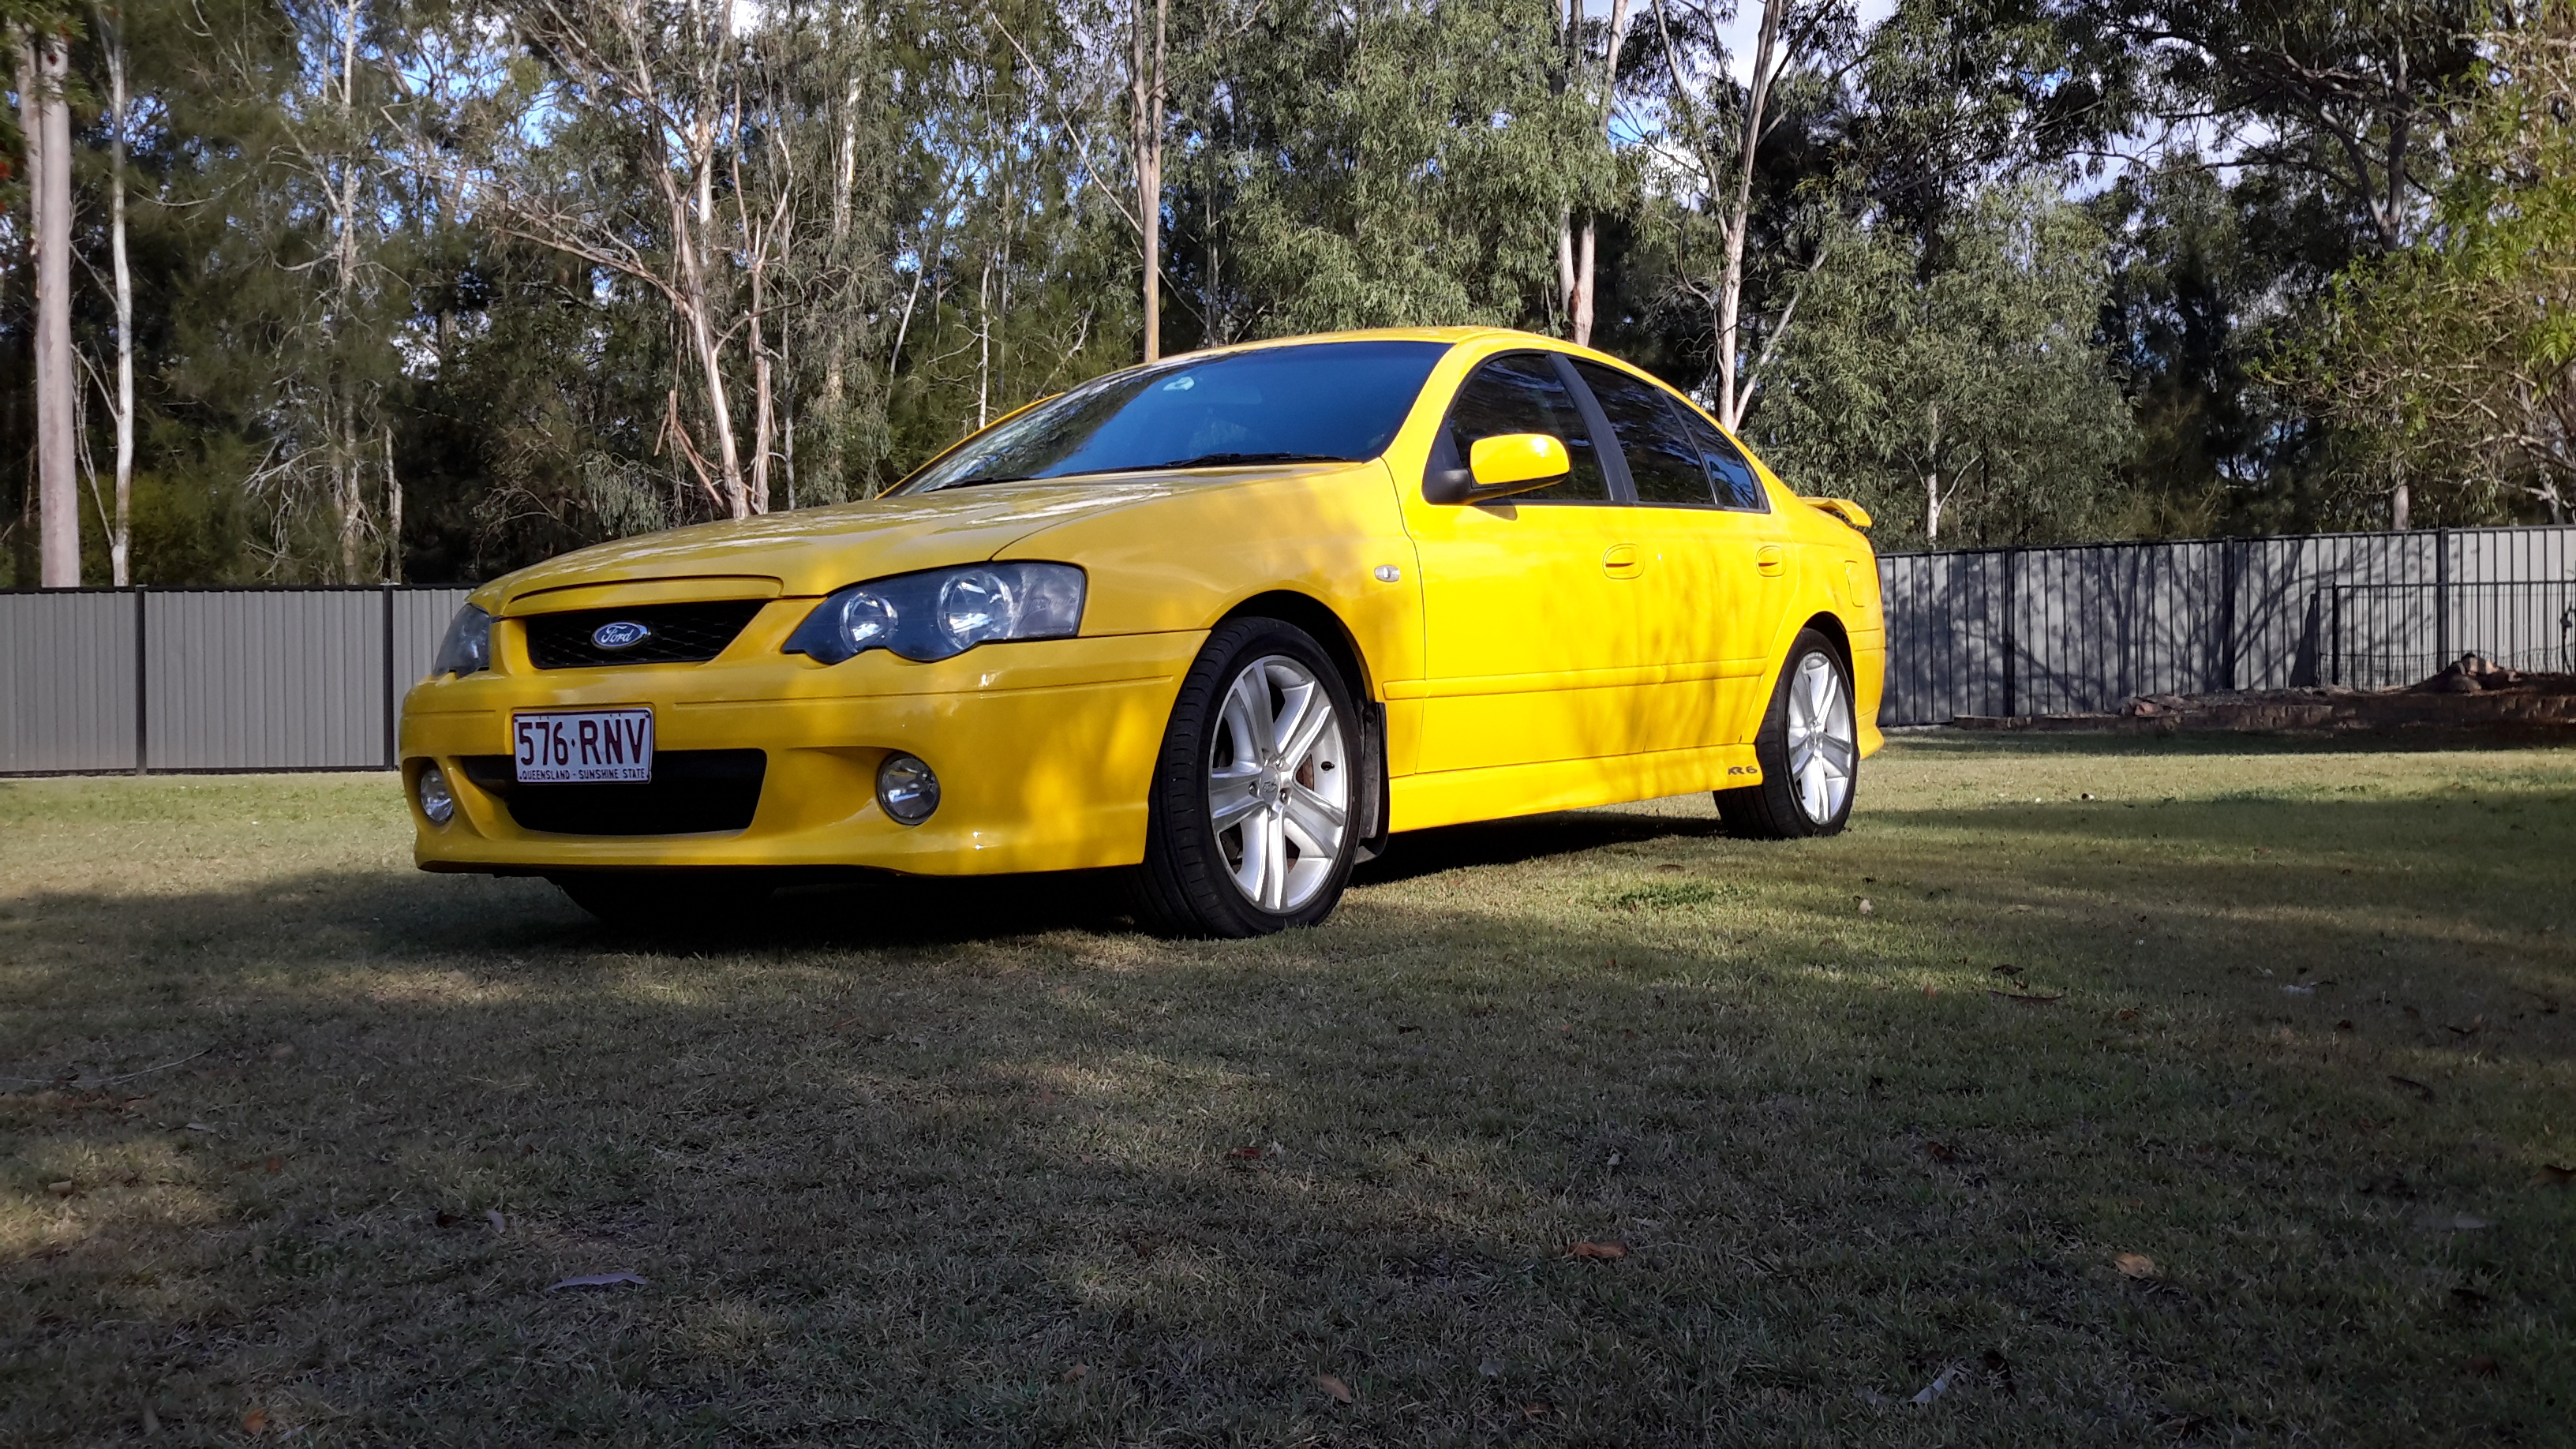 2005 Ford falcon ba mkii xr6 review #7